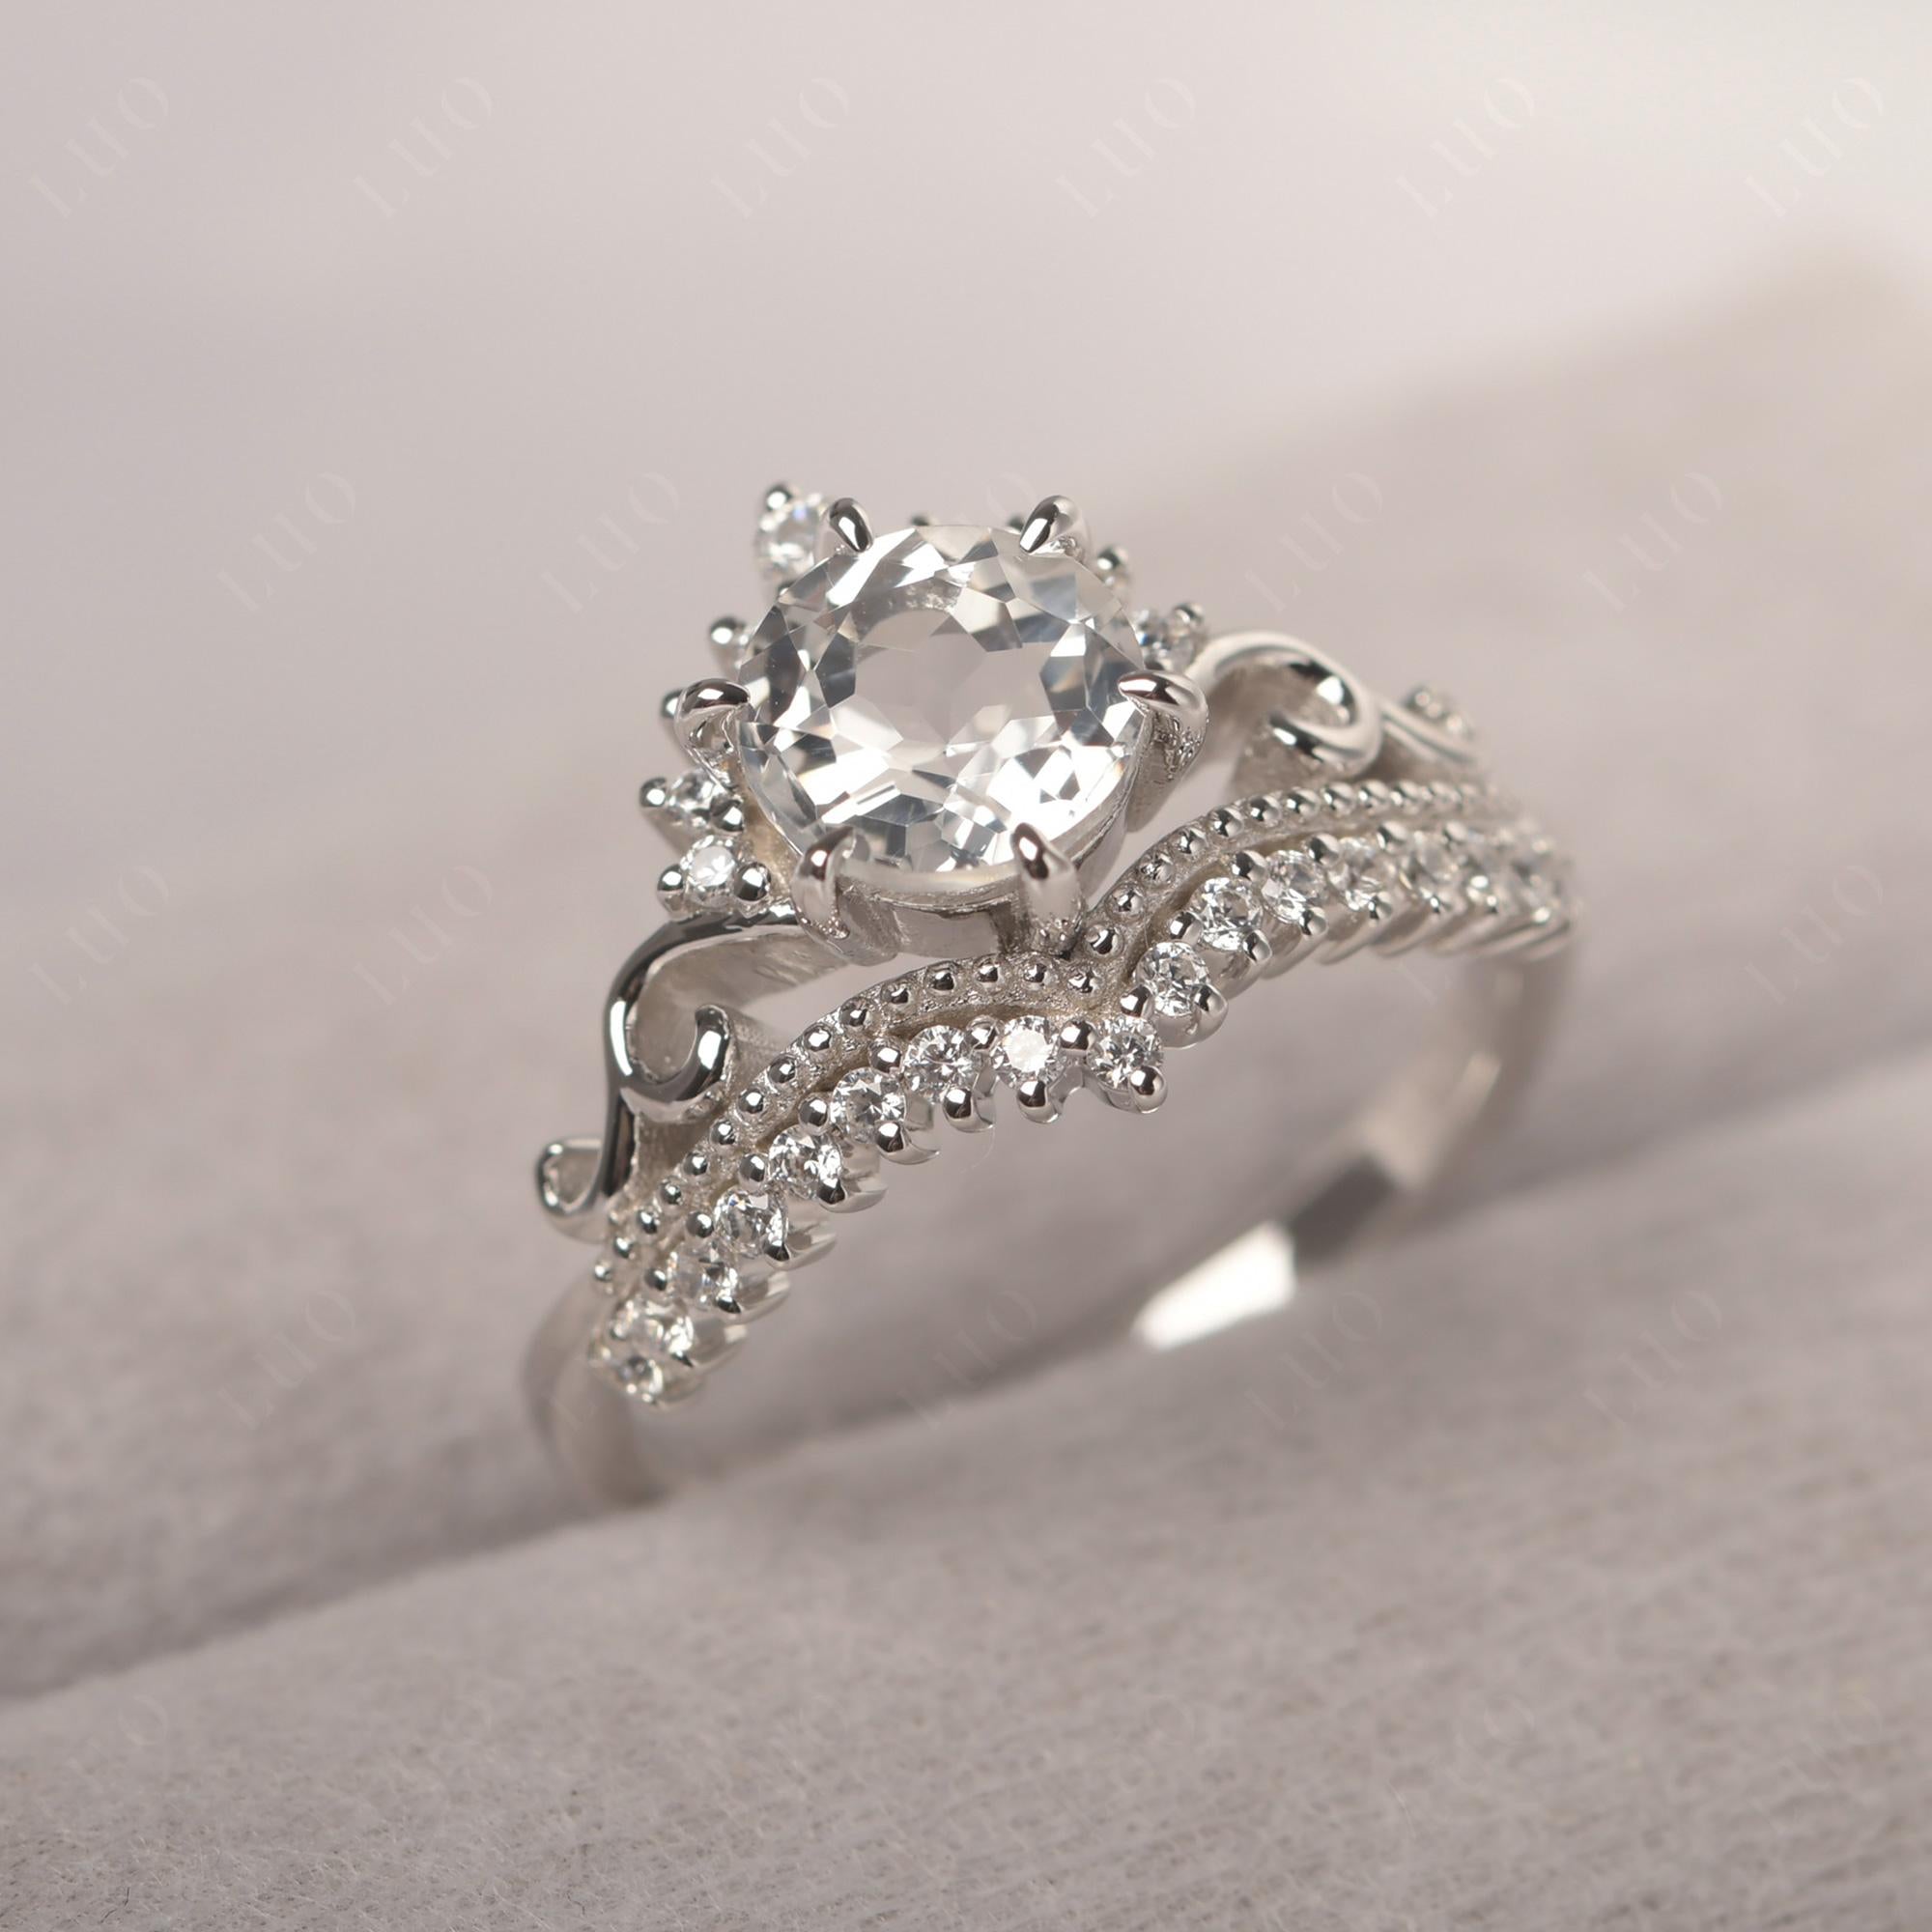 Vintage White Topaz Cocktail Ring - LUO Jewelry